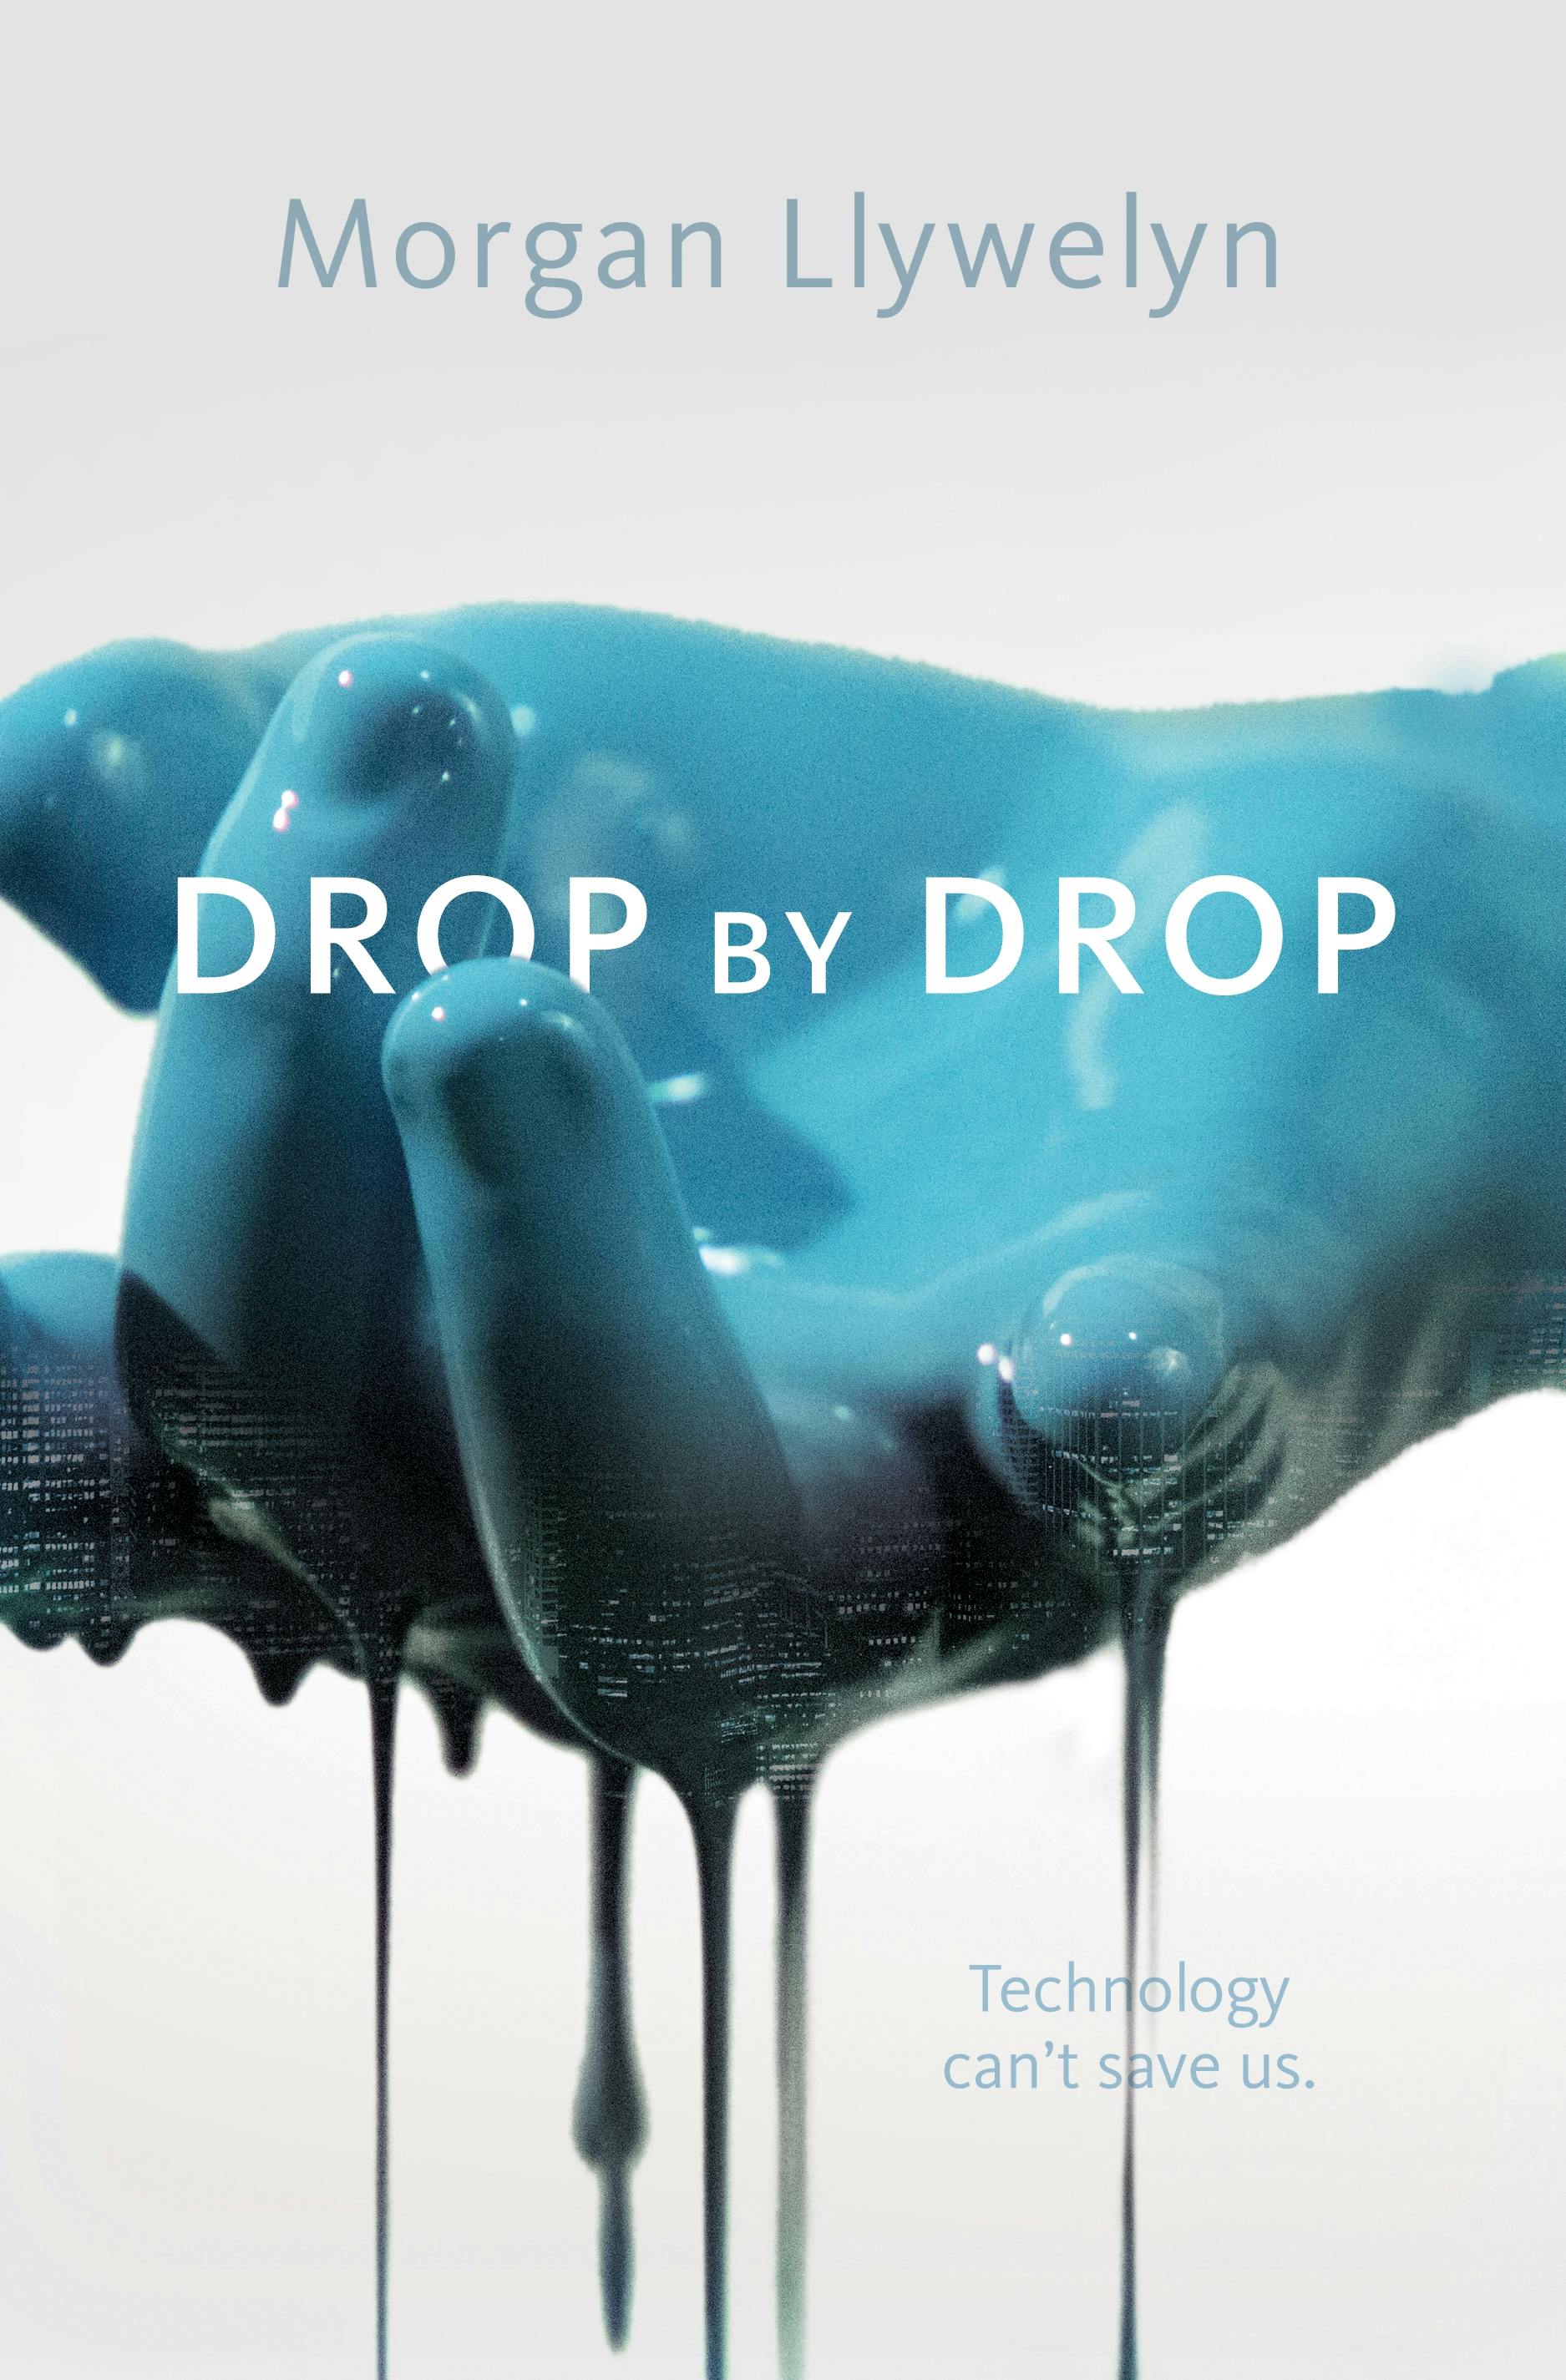 Cover for the book titled as: Drop by Drop